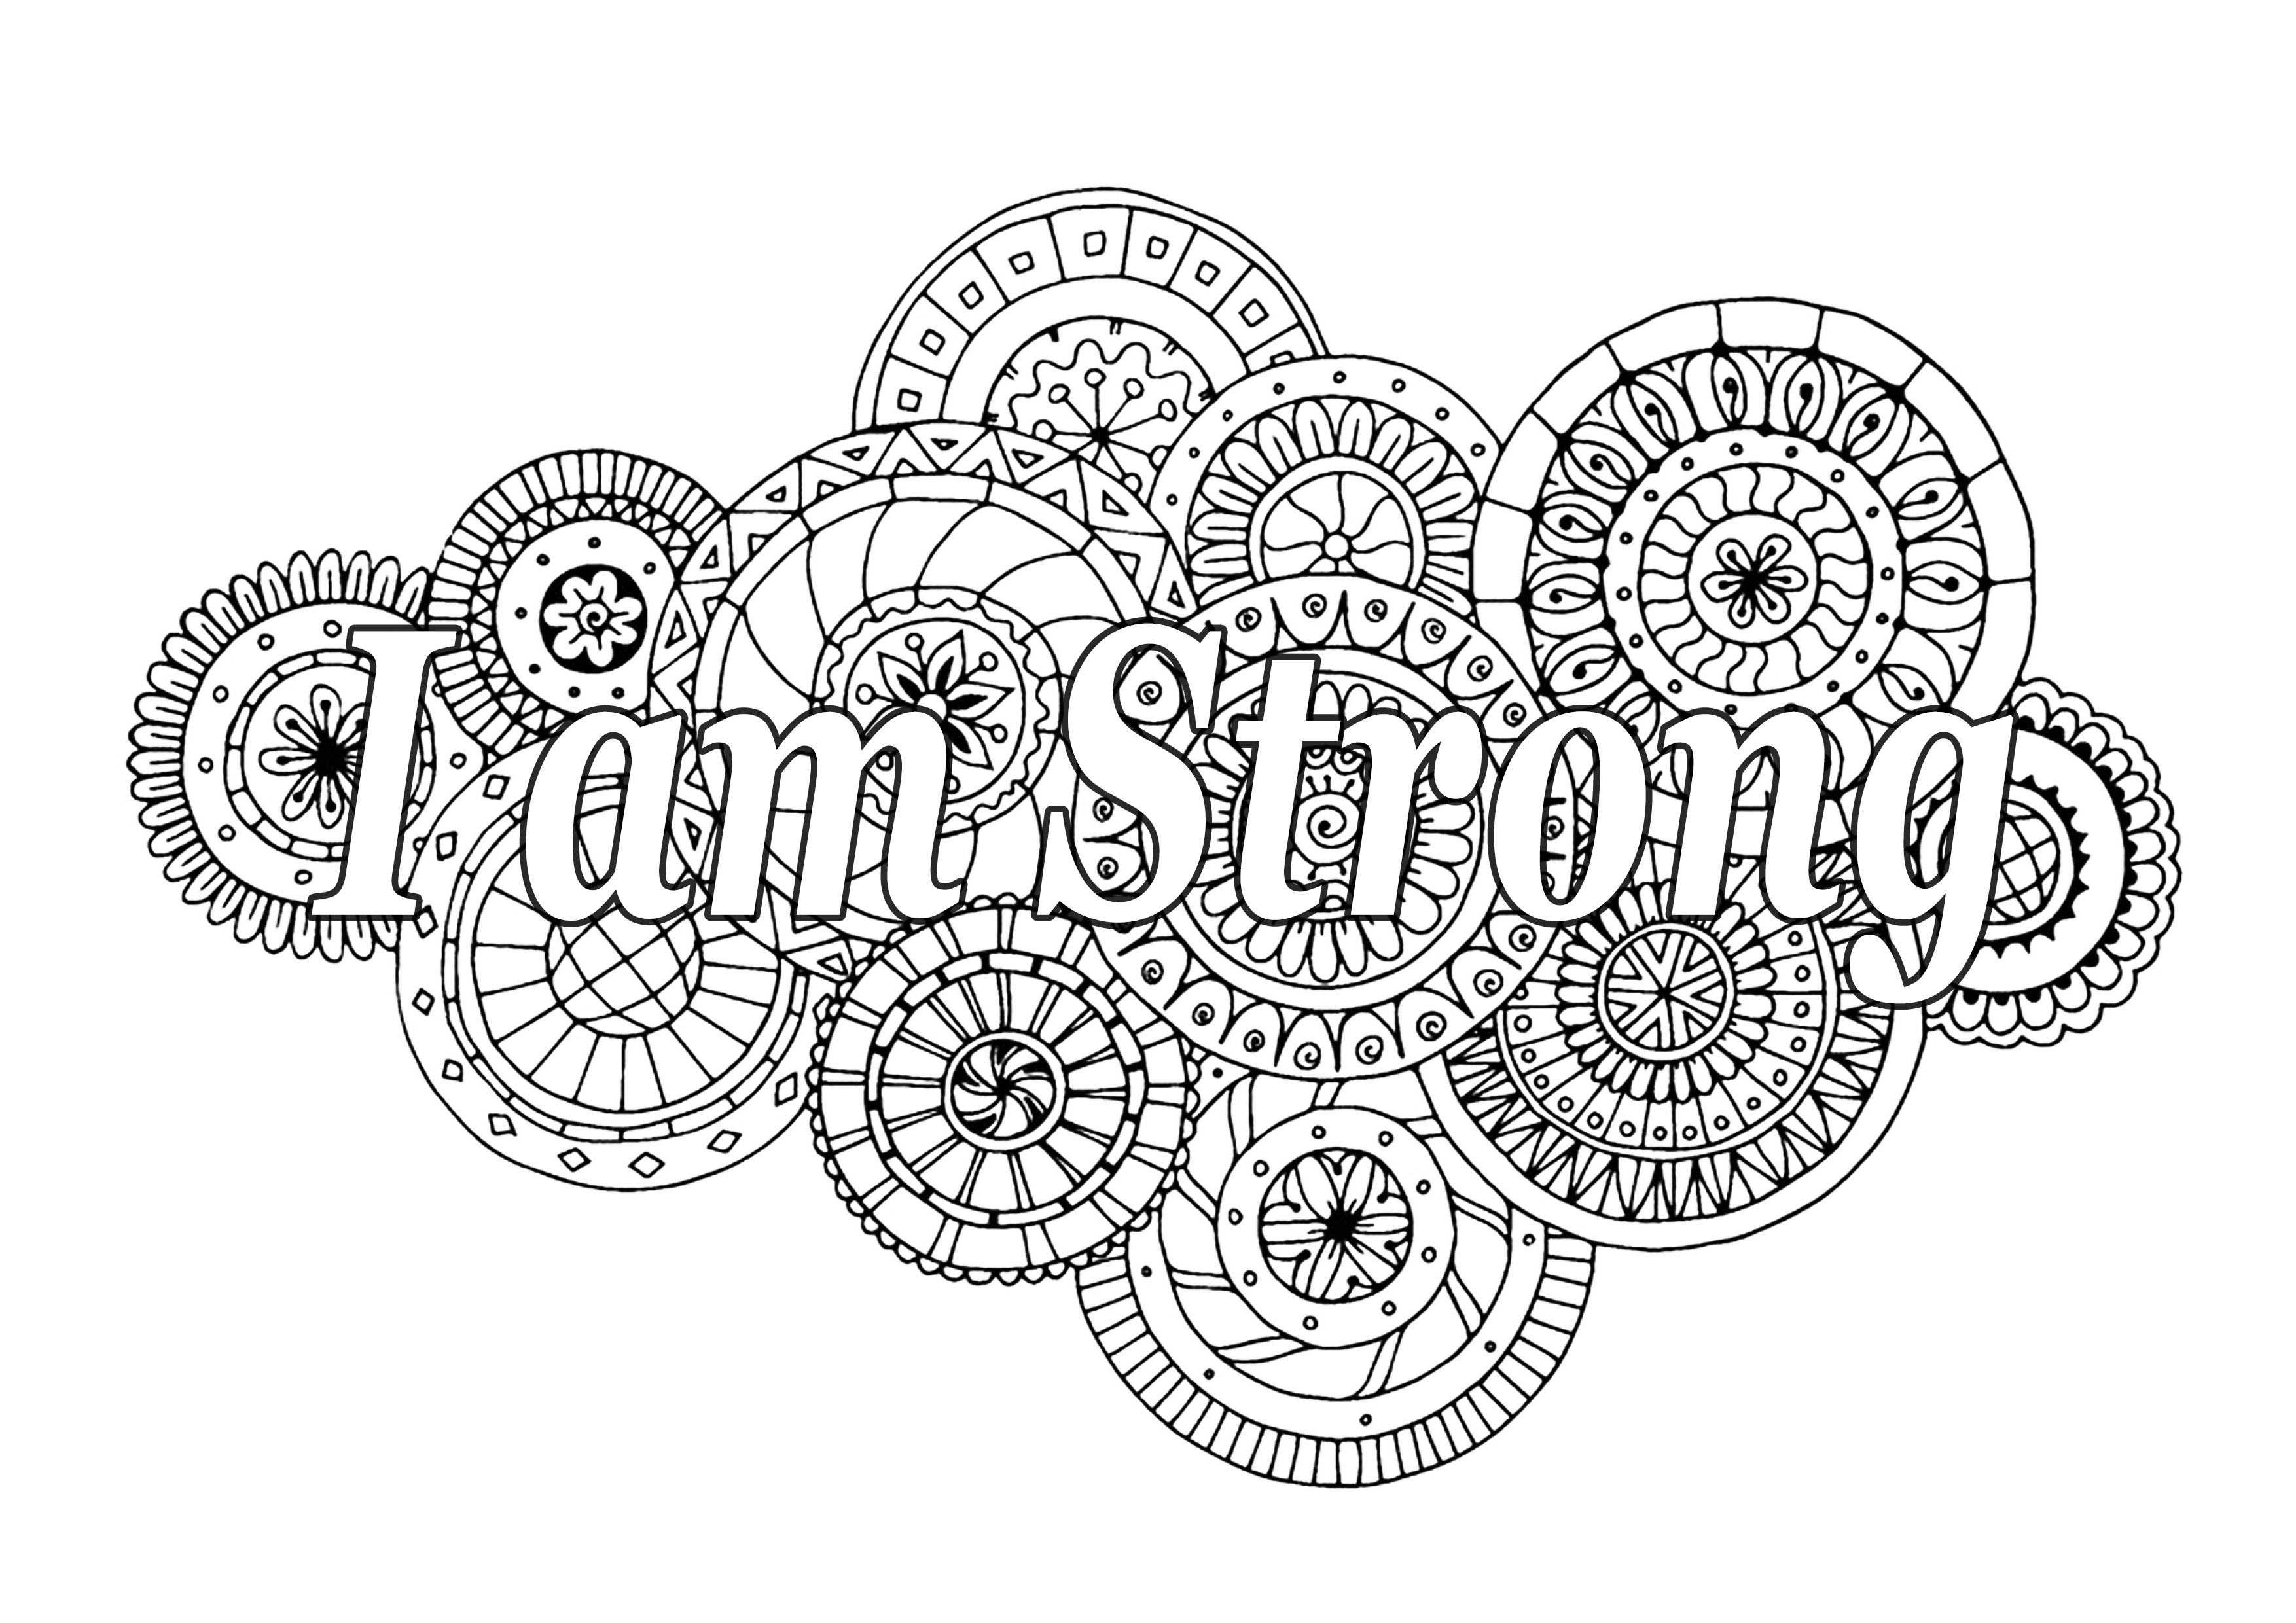 I am strong. A motivational quote, with beautiful mandalas in the background